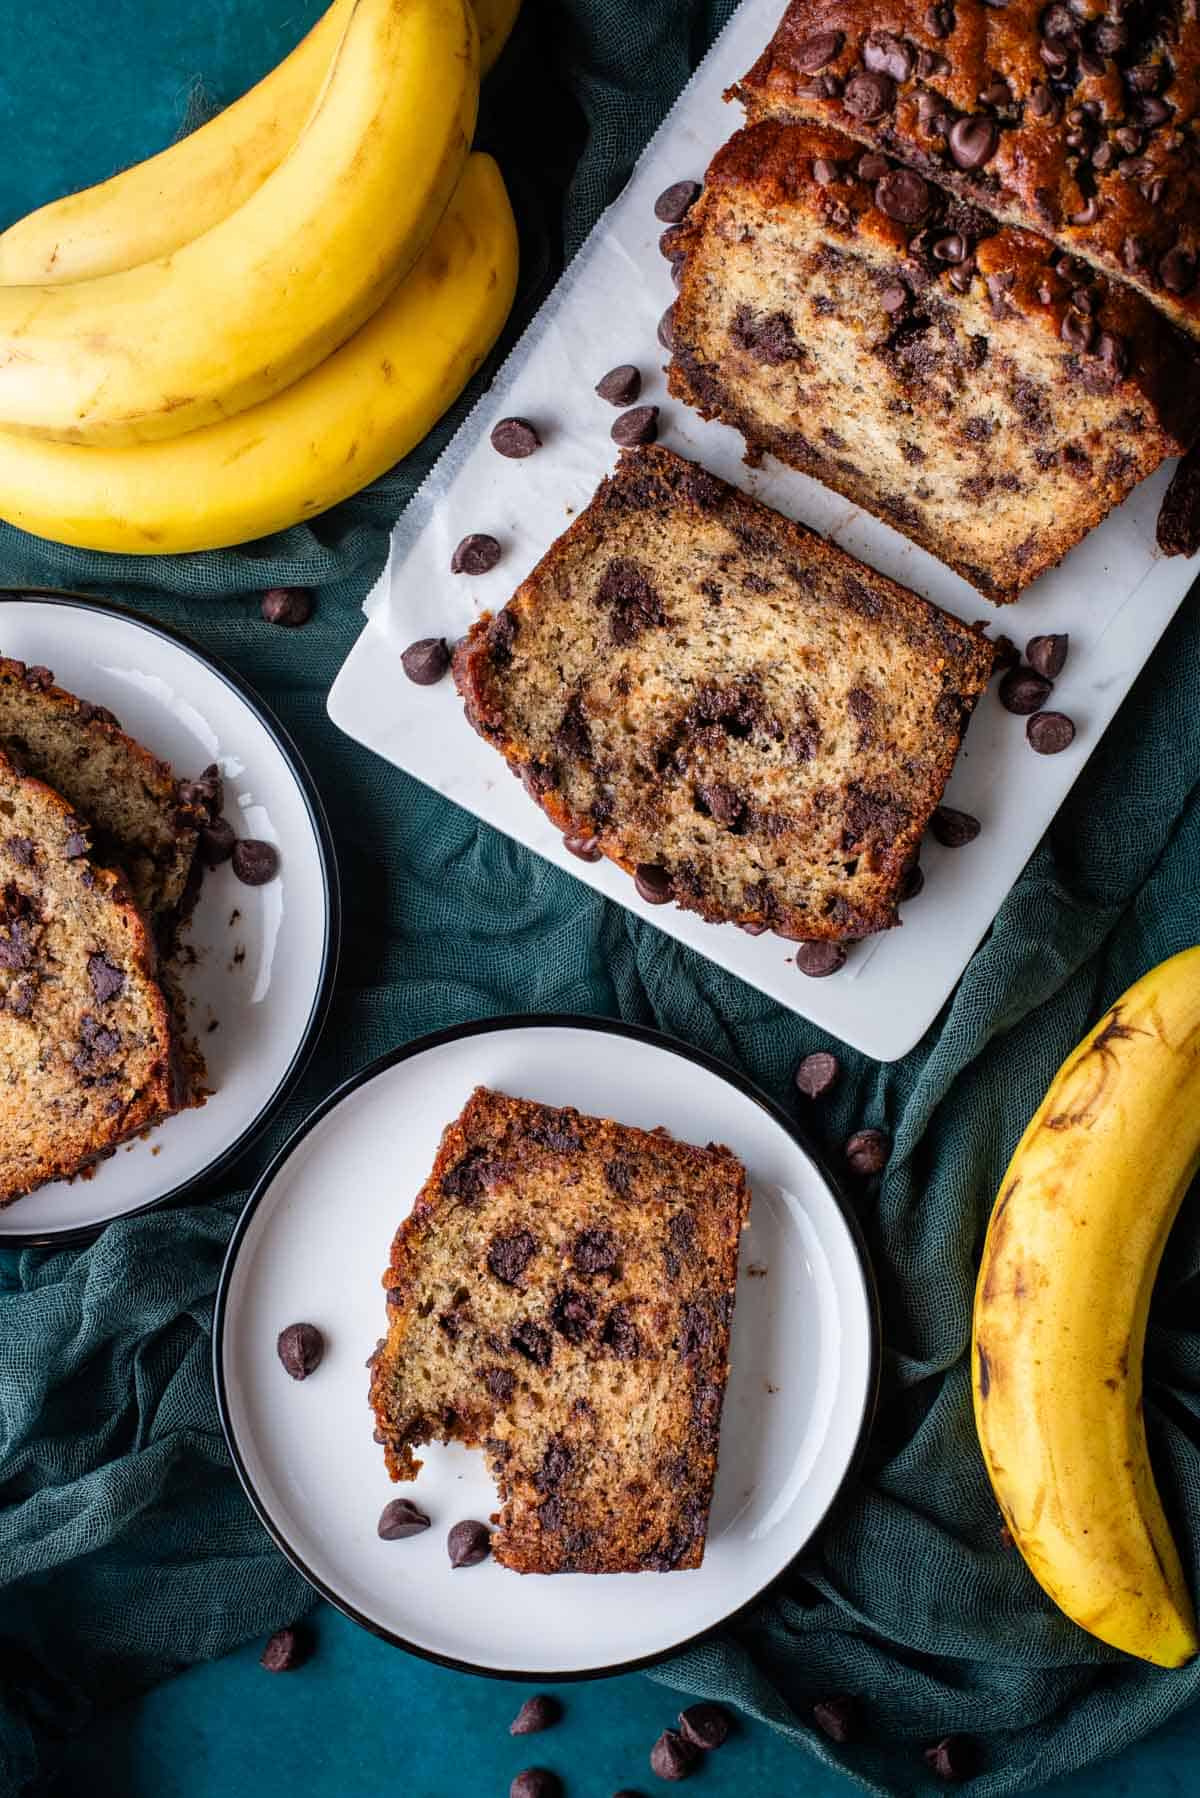 an overhead view of two white plates and one white cutting board with slices of chocolate chip banana bread on them, all sitting on top of a dark teal towel with chocolate chips and whole bananas scattered around